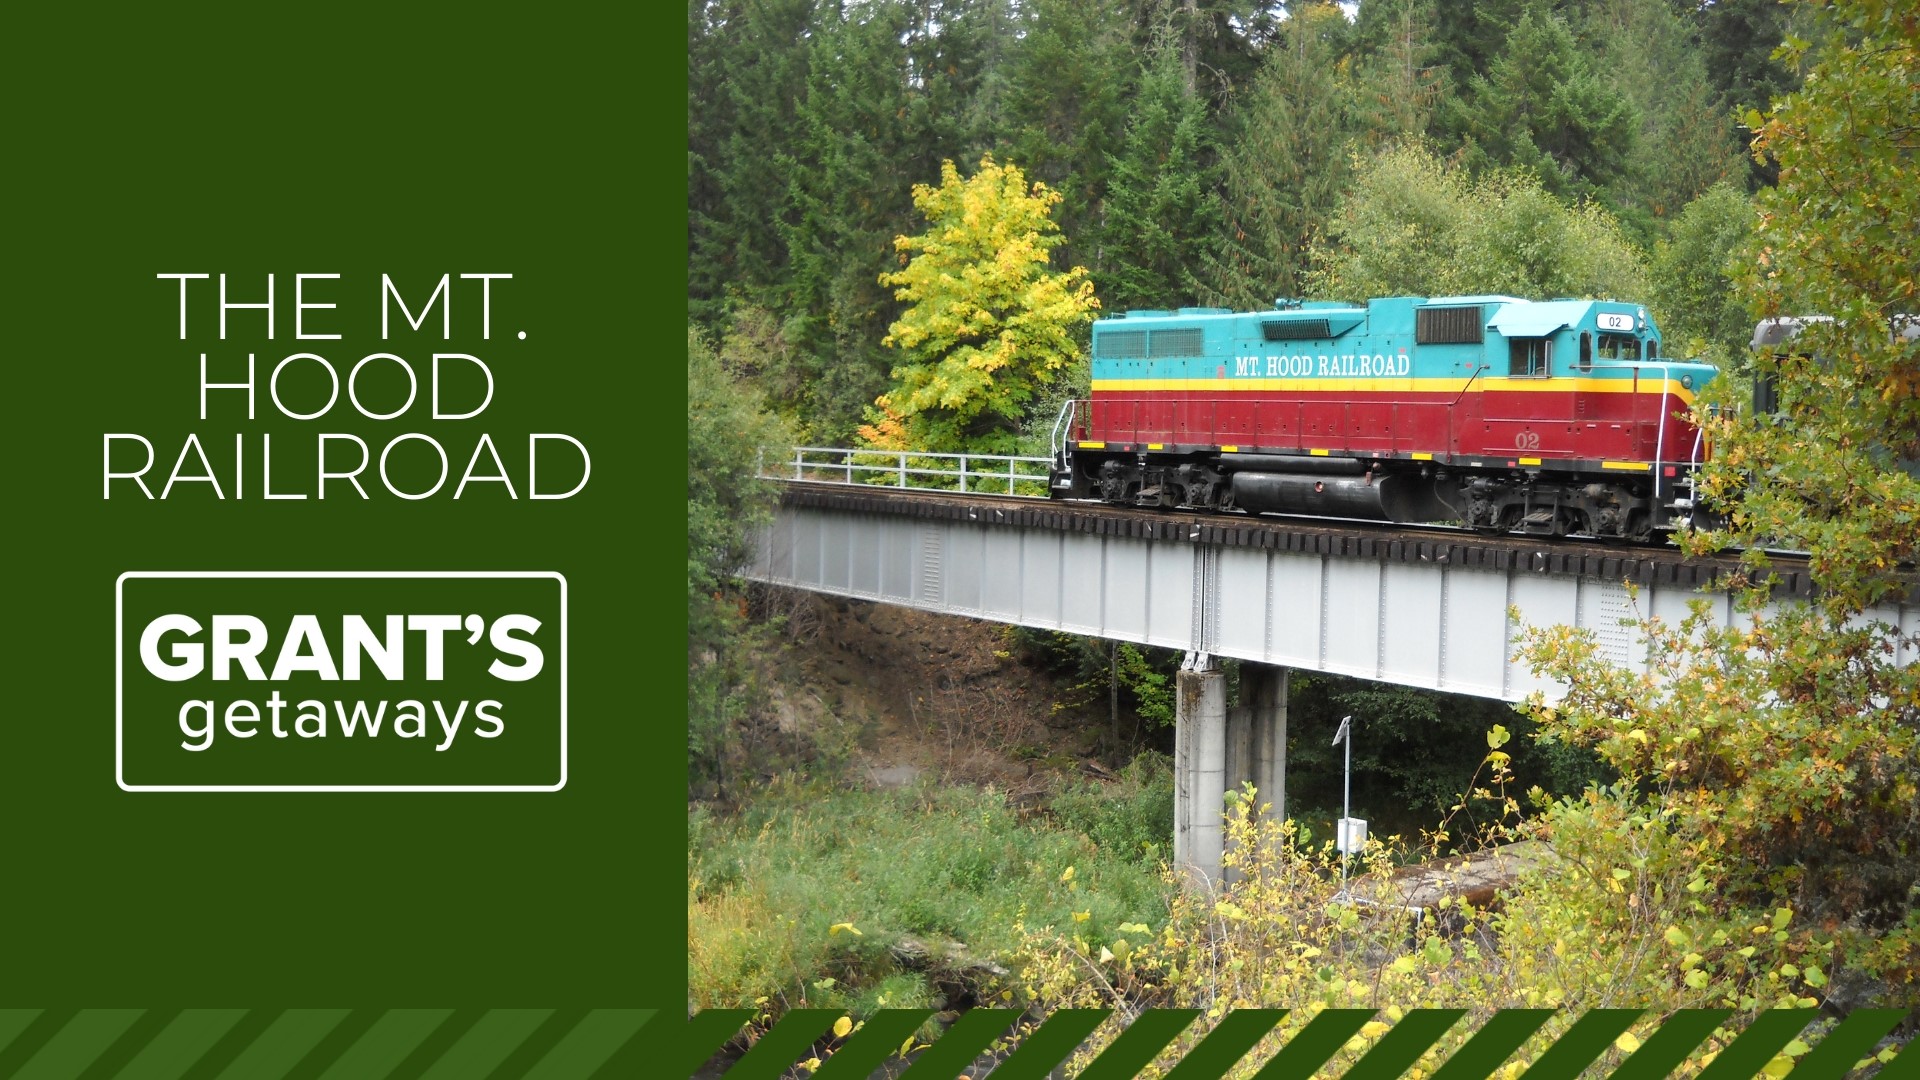 It's a scenic ride that'll leave you wide-eyed and slack-jawed for seasonal beauty on the Mount Hood Railroad.